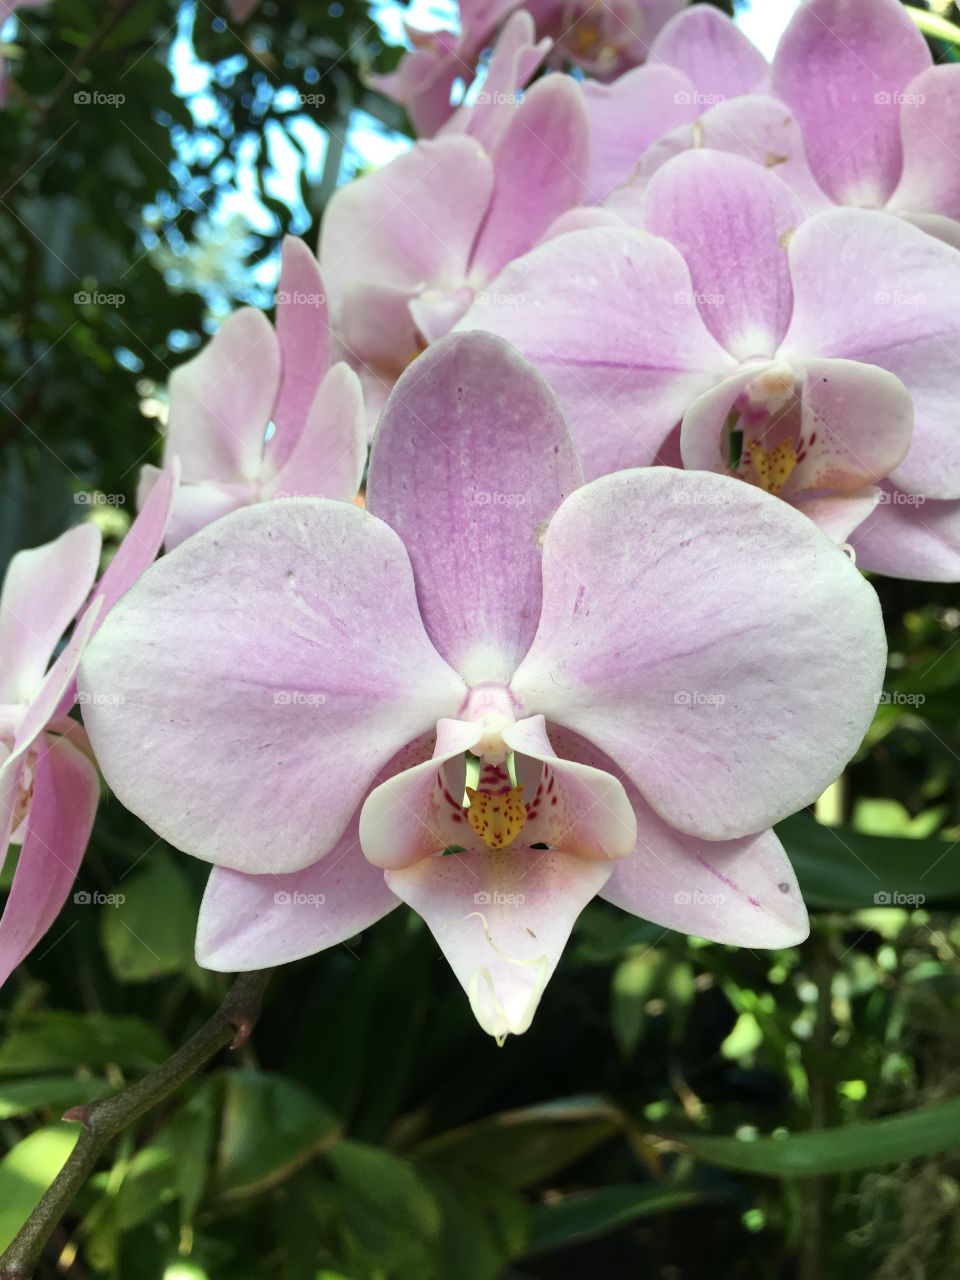 Orchid up close